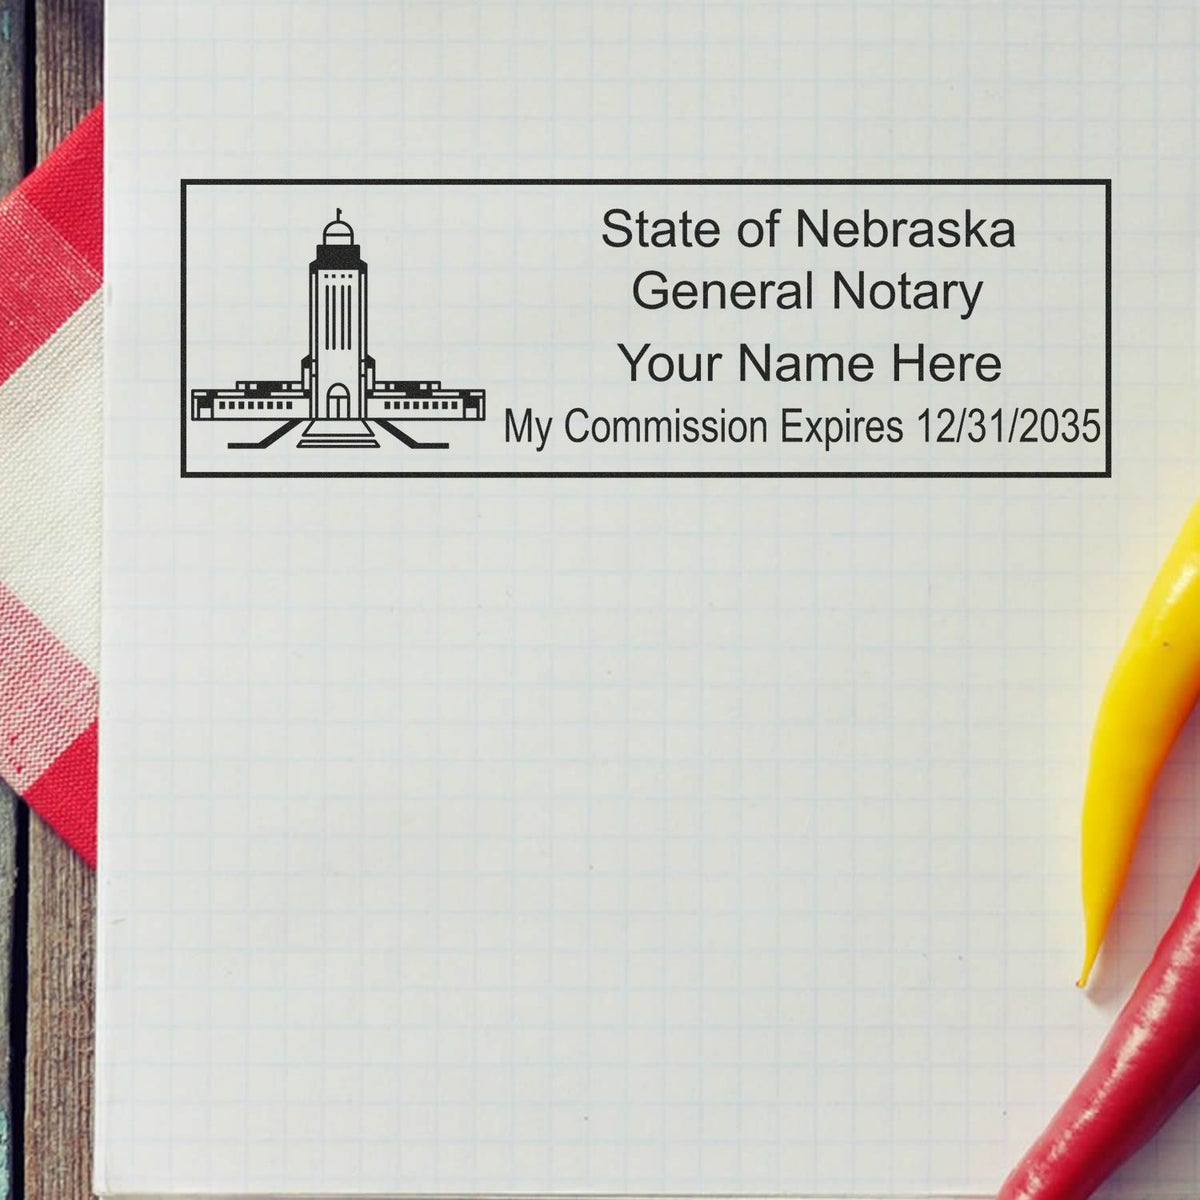 An alternative view of the PSI Nebraska Notary Stamp stamped on a sheet of paper showing the image in use